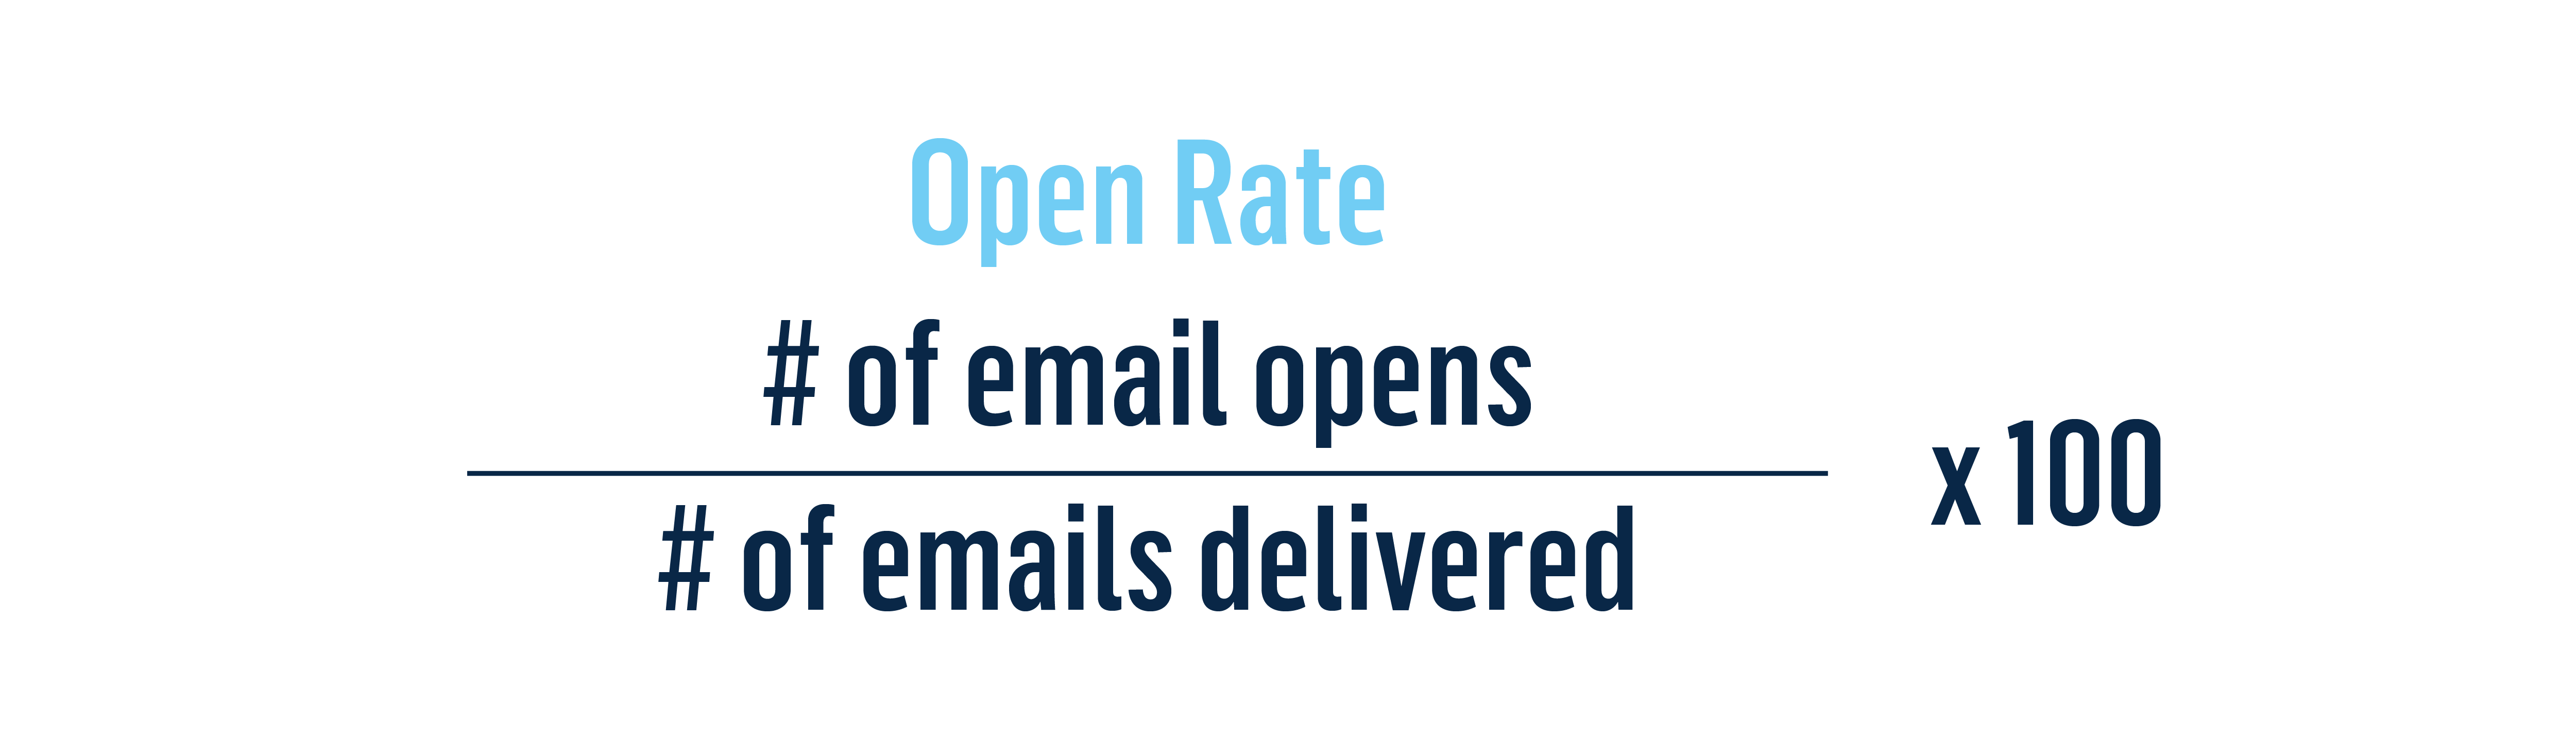 Open Rate: # of email opens / # of emails delivered x 100